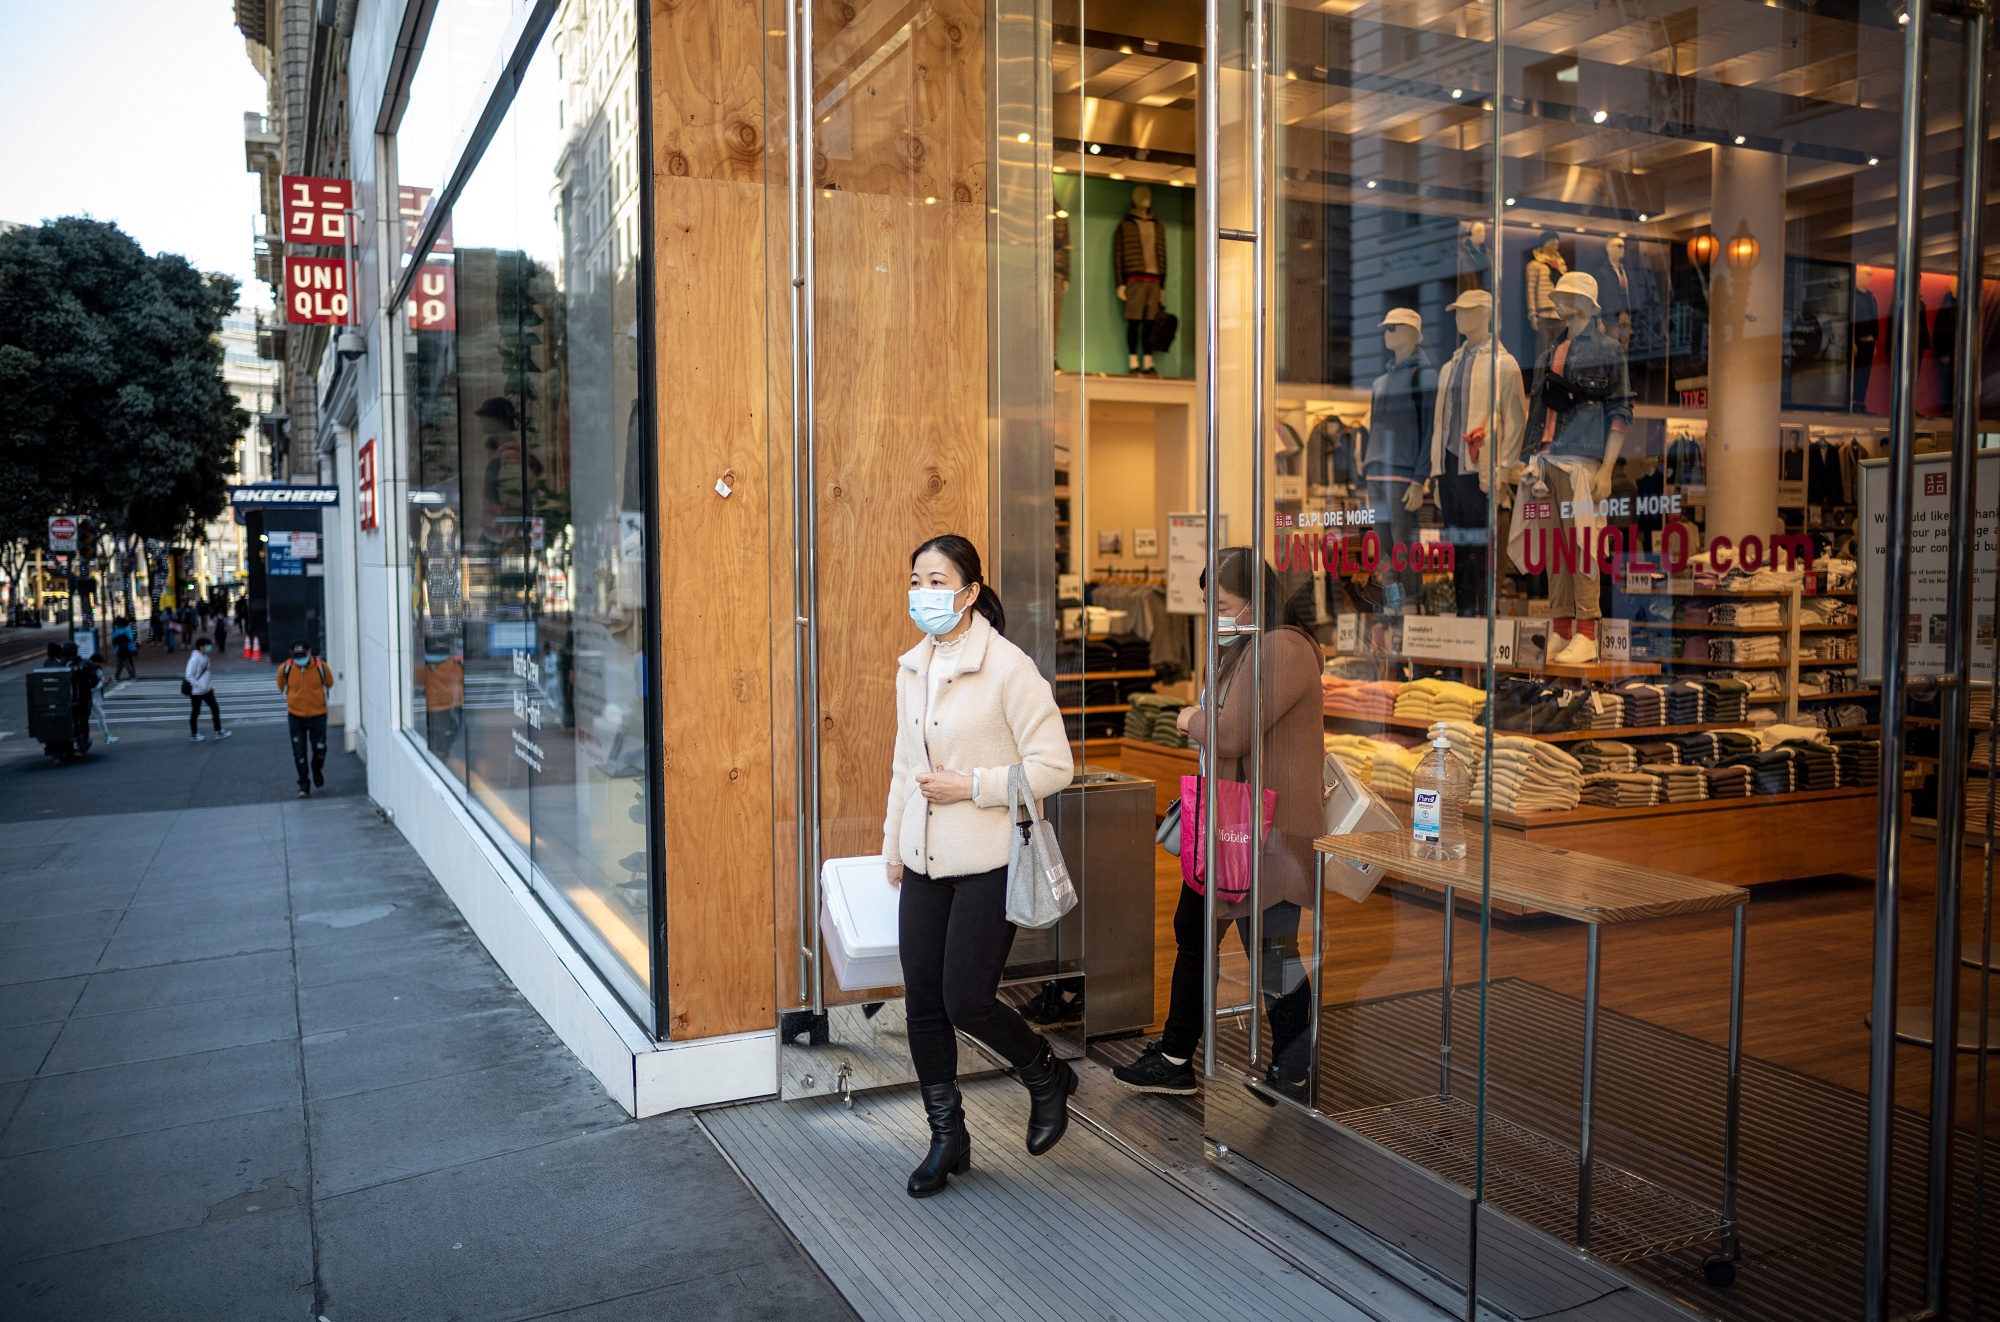 Uniqlo Specialty Retail FitOut  Renovation Project in New York NY